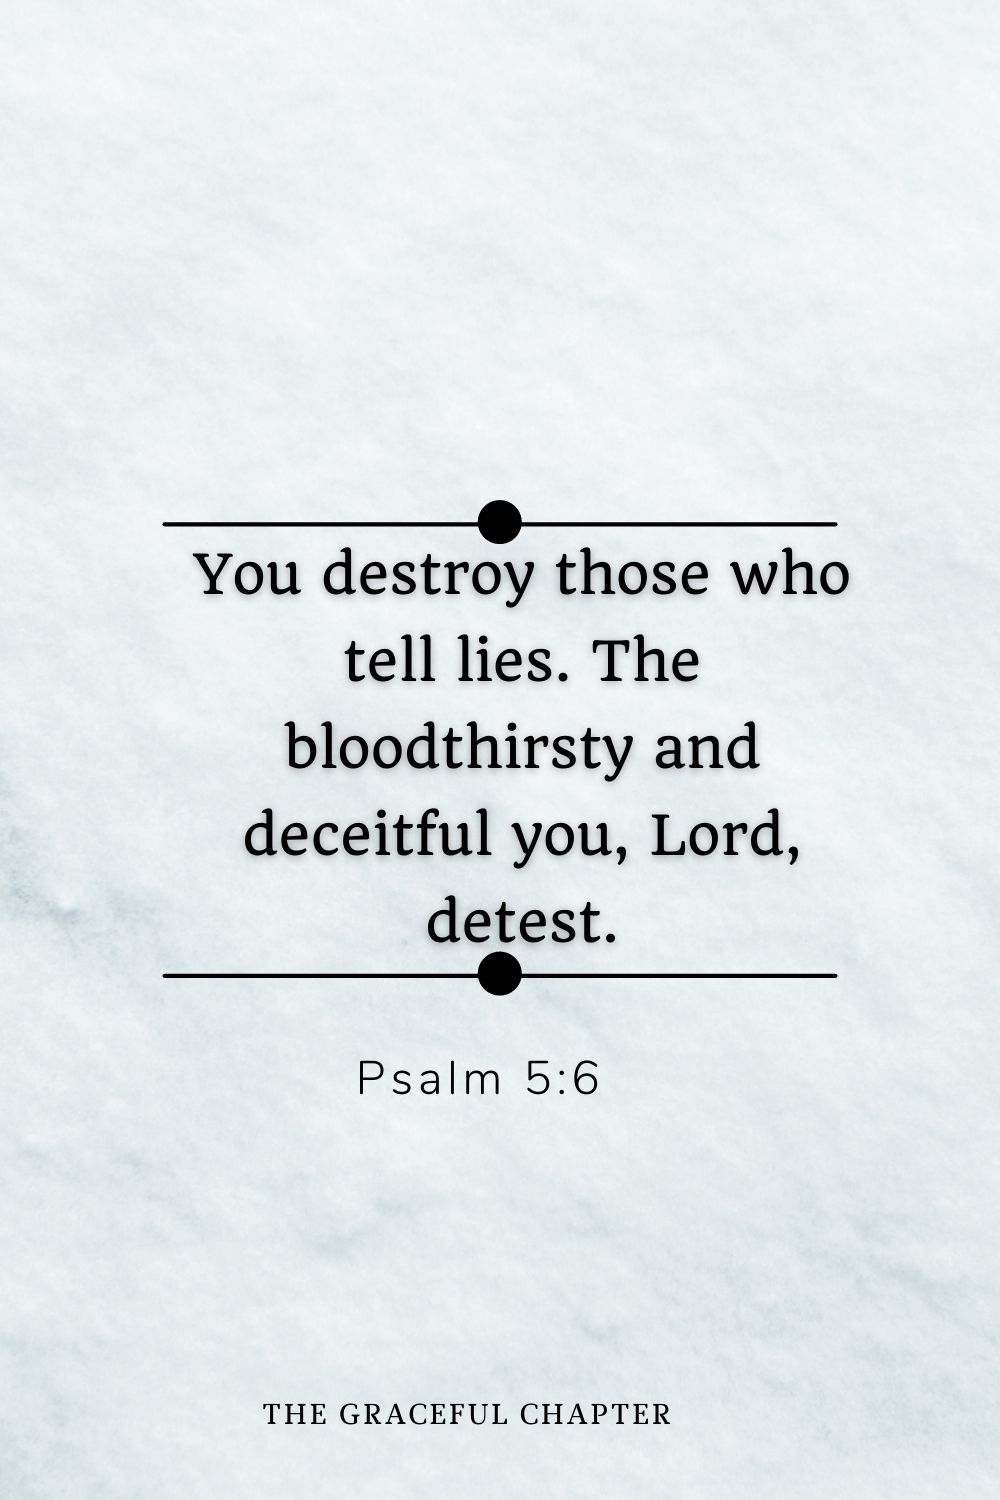 You destroy those who tell lies. The bloodthirsty and deceitful you, Lord, detest. Psalm 5:6